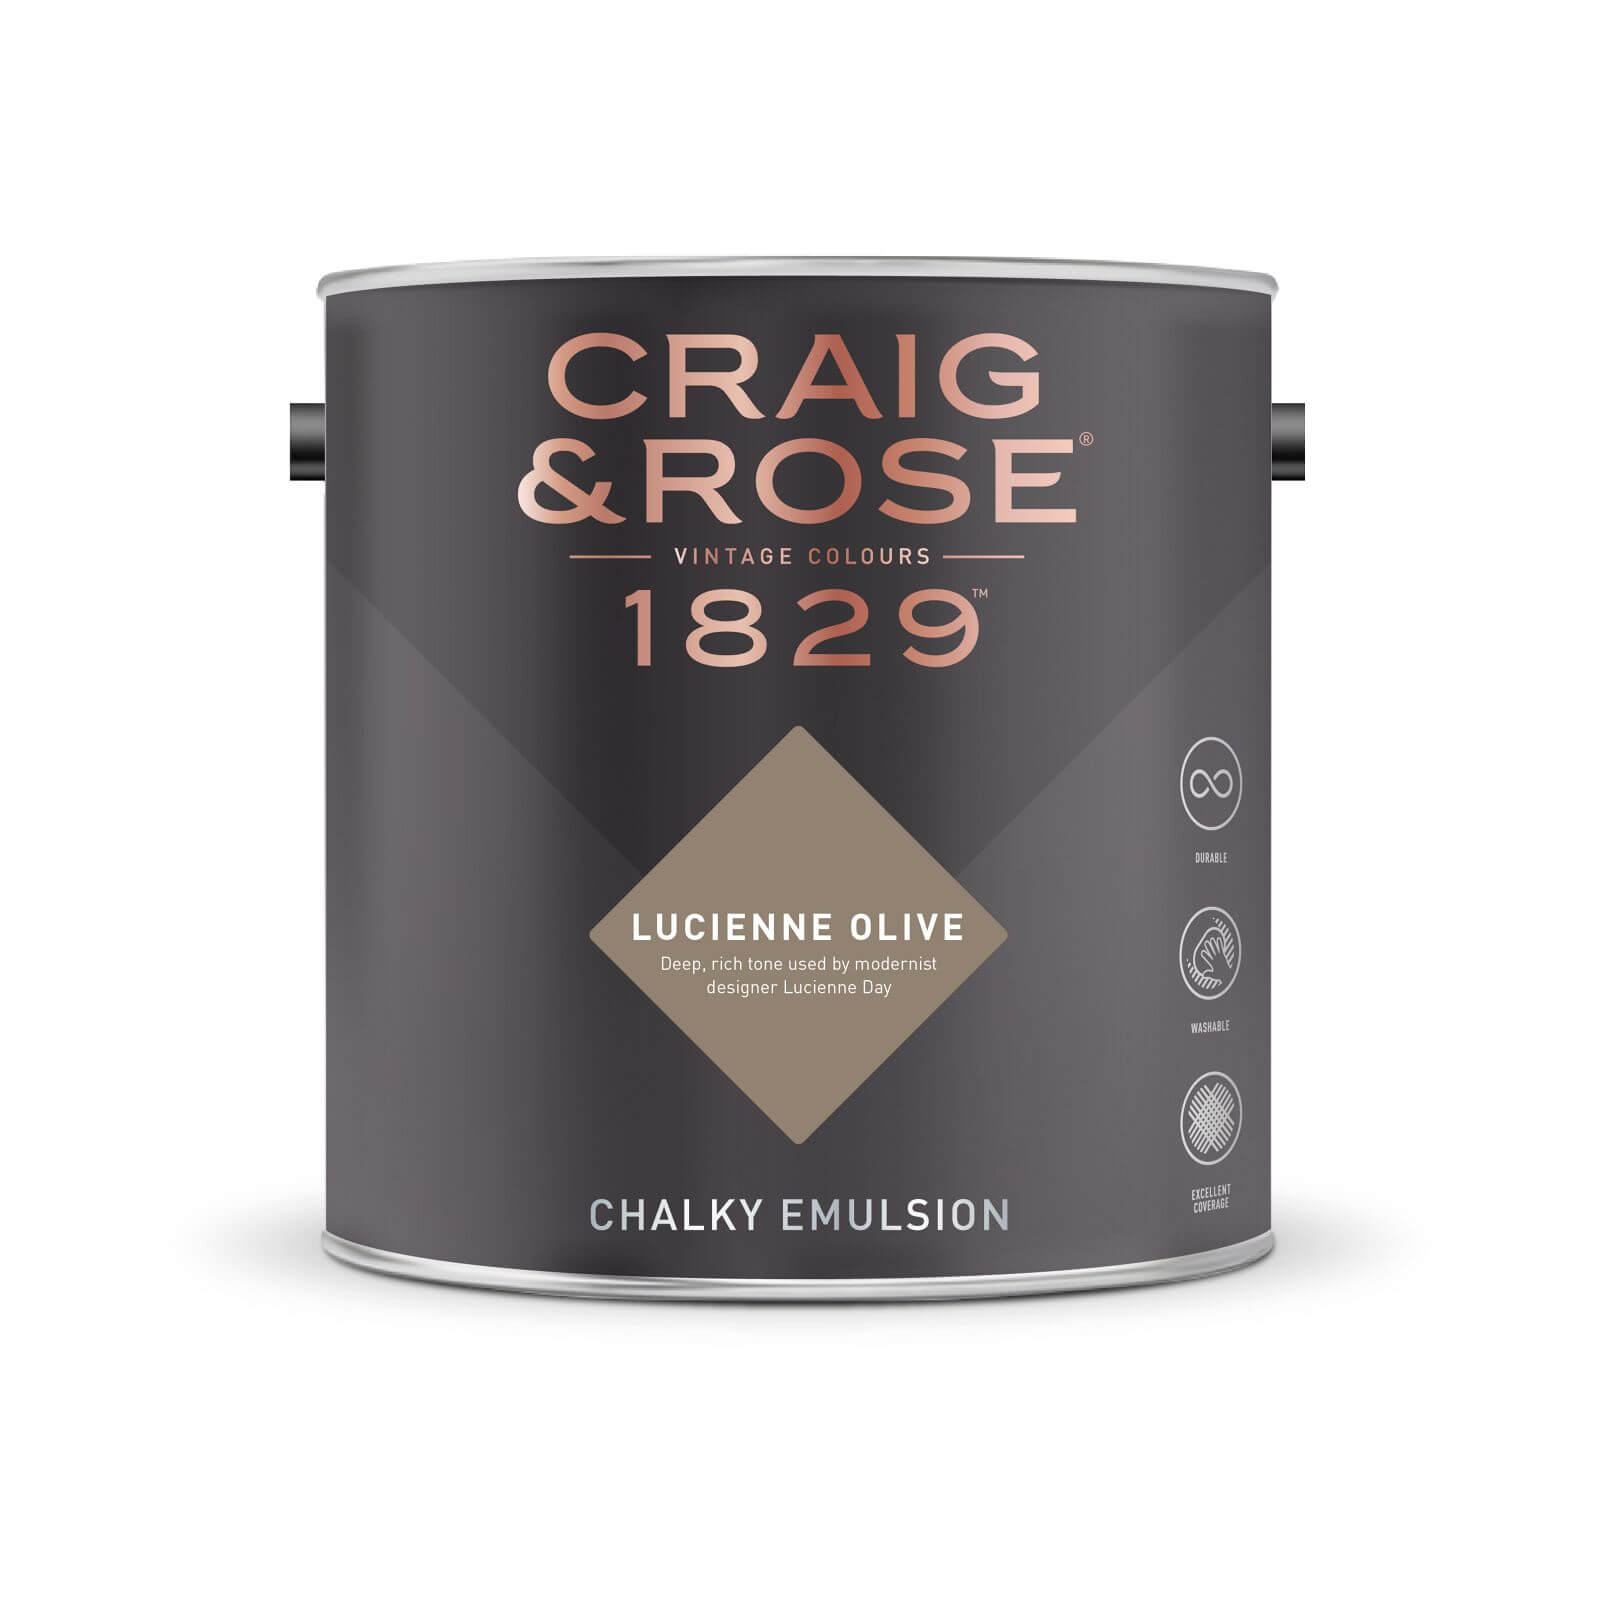 Craig & Rose 1829 Chalky Emulsion Paint Lucienne Olive - Tester 50ml